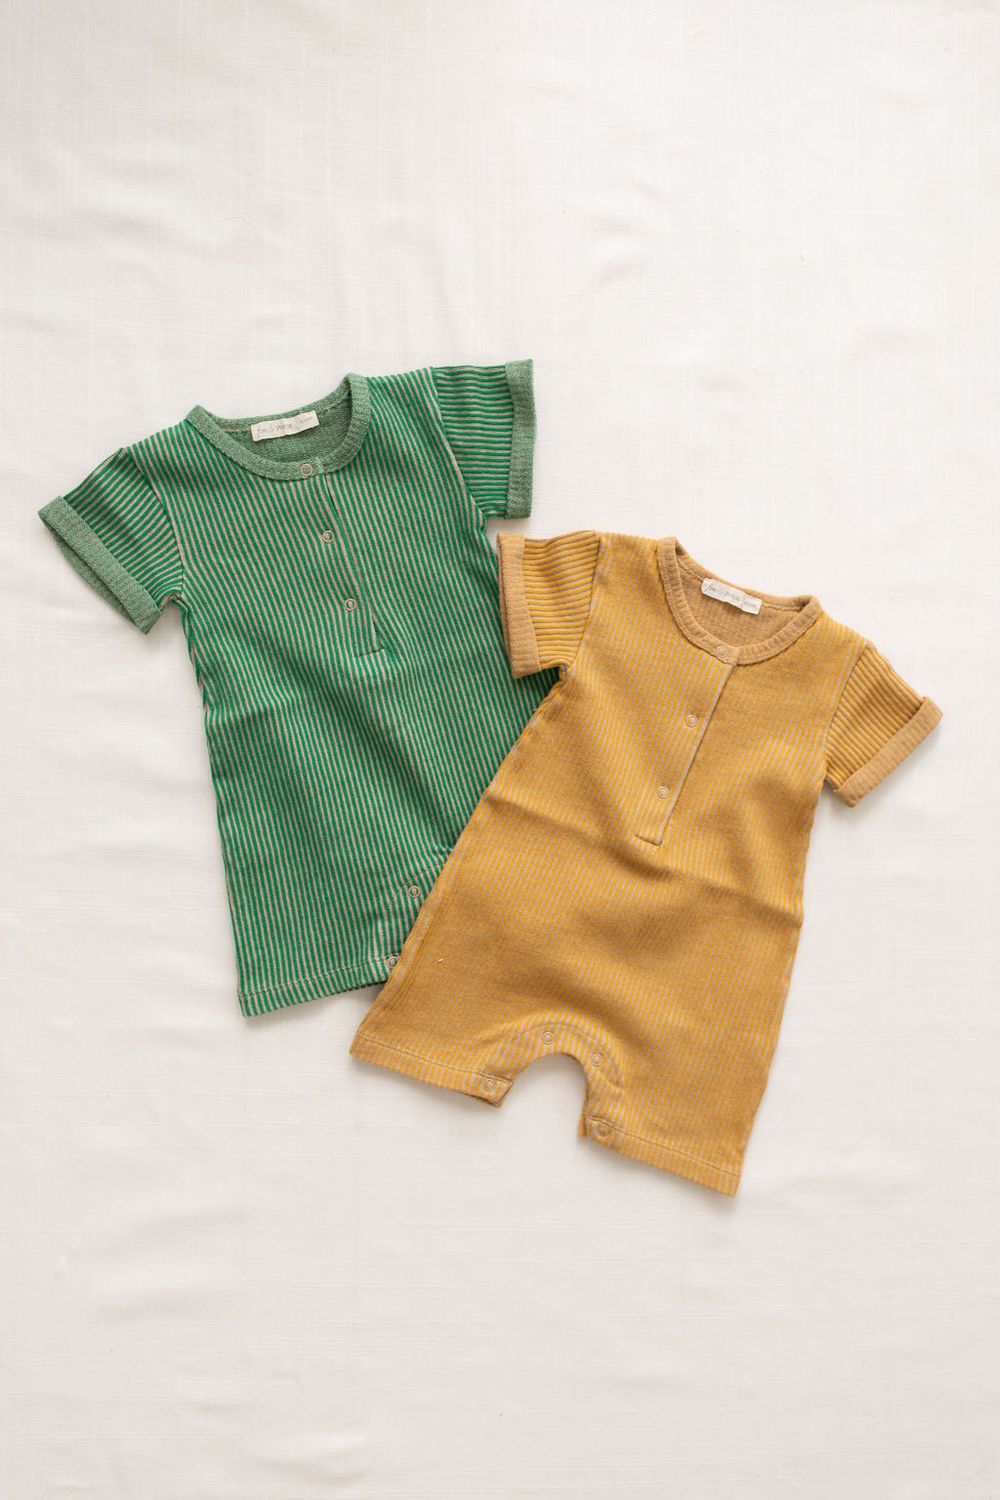 Fin and Vince Ribbed Terry One piece in Emerald | 50% OFF | Children of the Wild